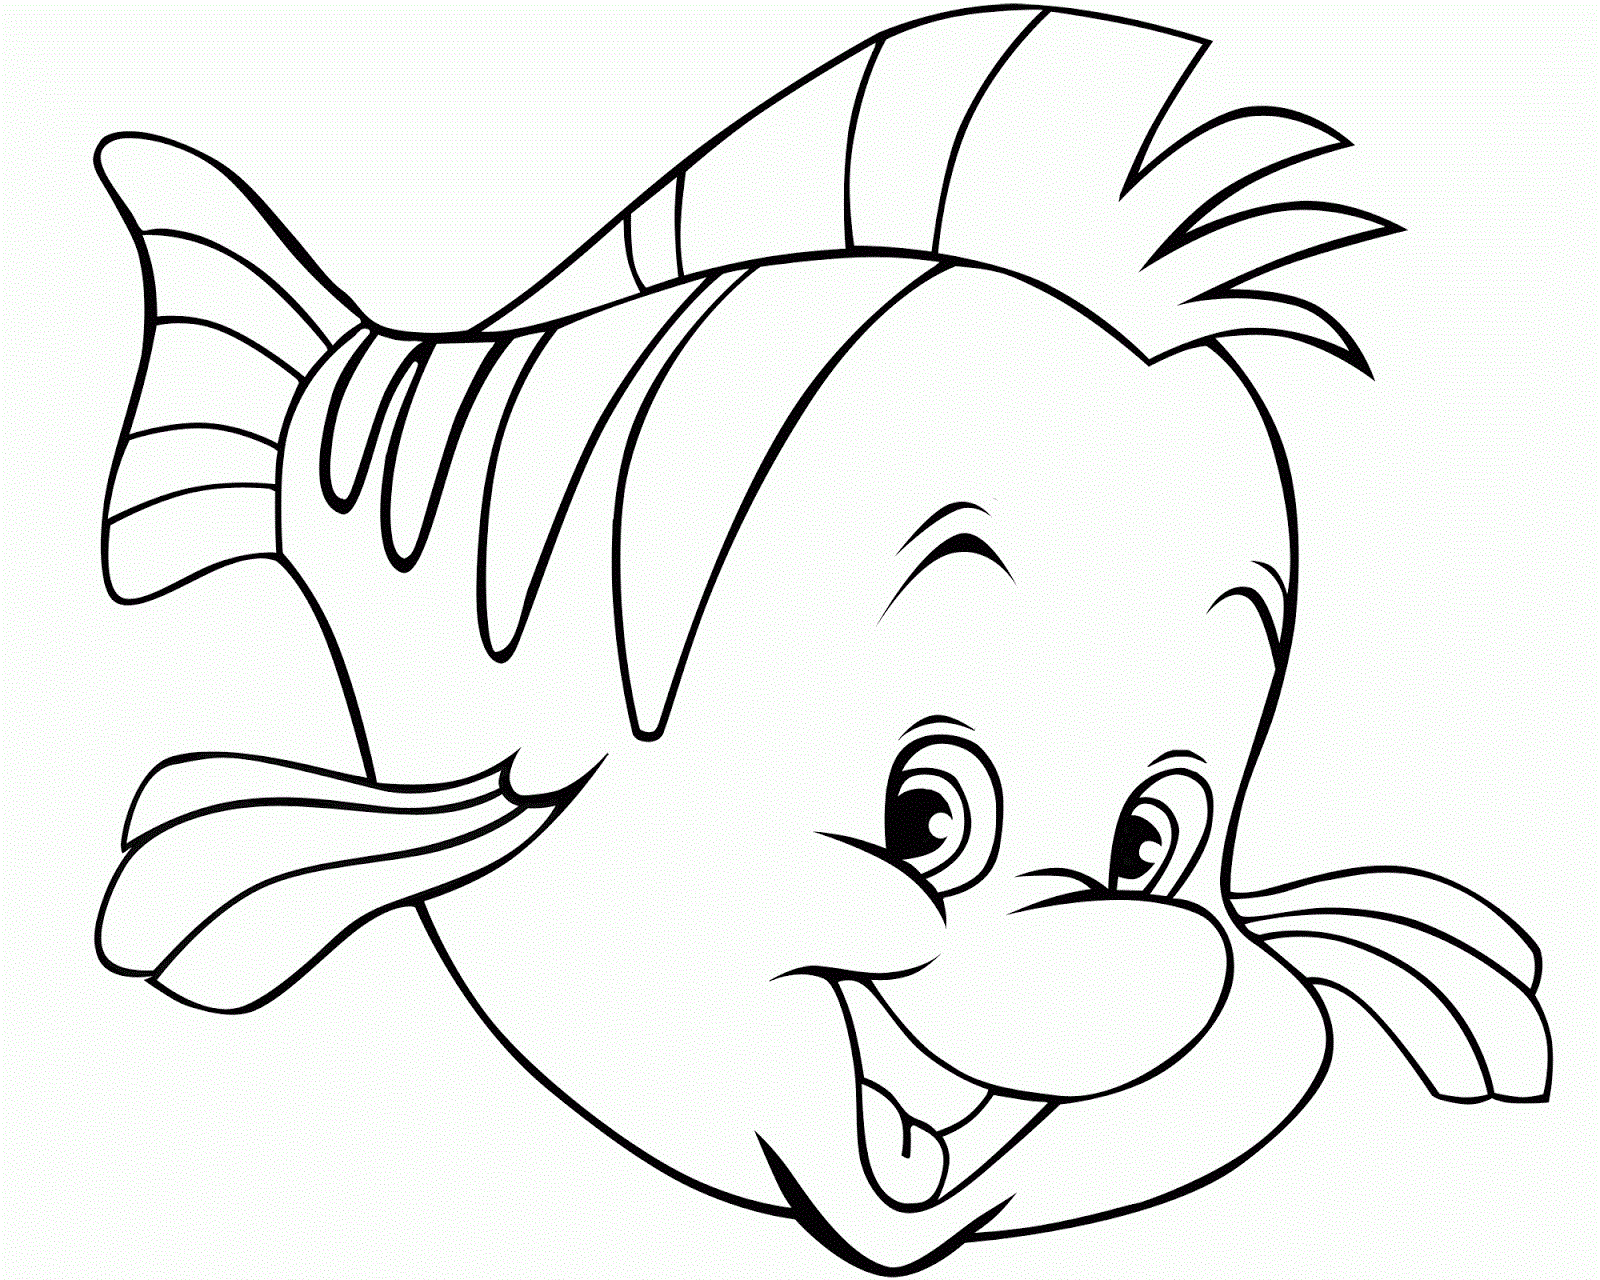 Coloring Sheets for Toddlers Fish